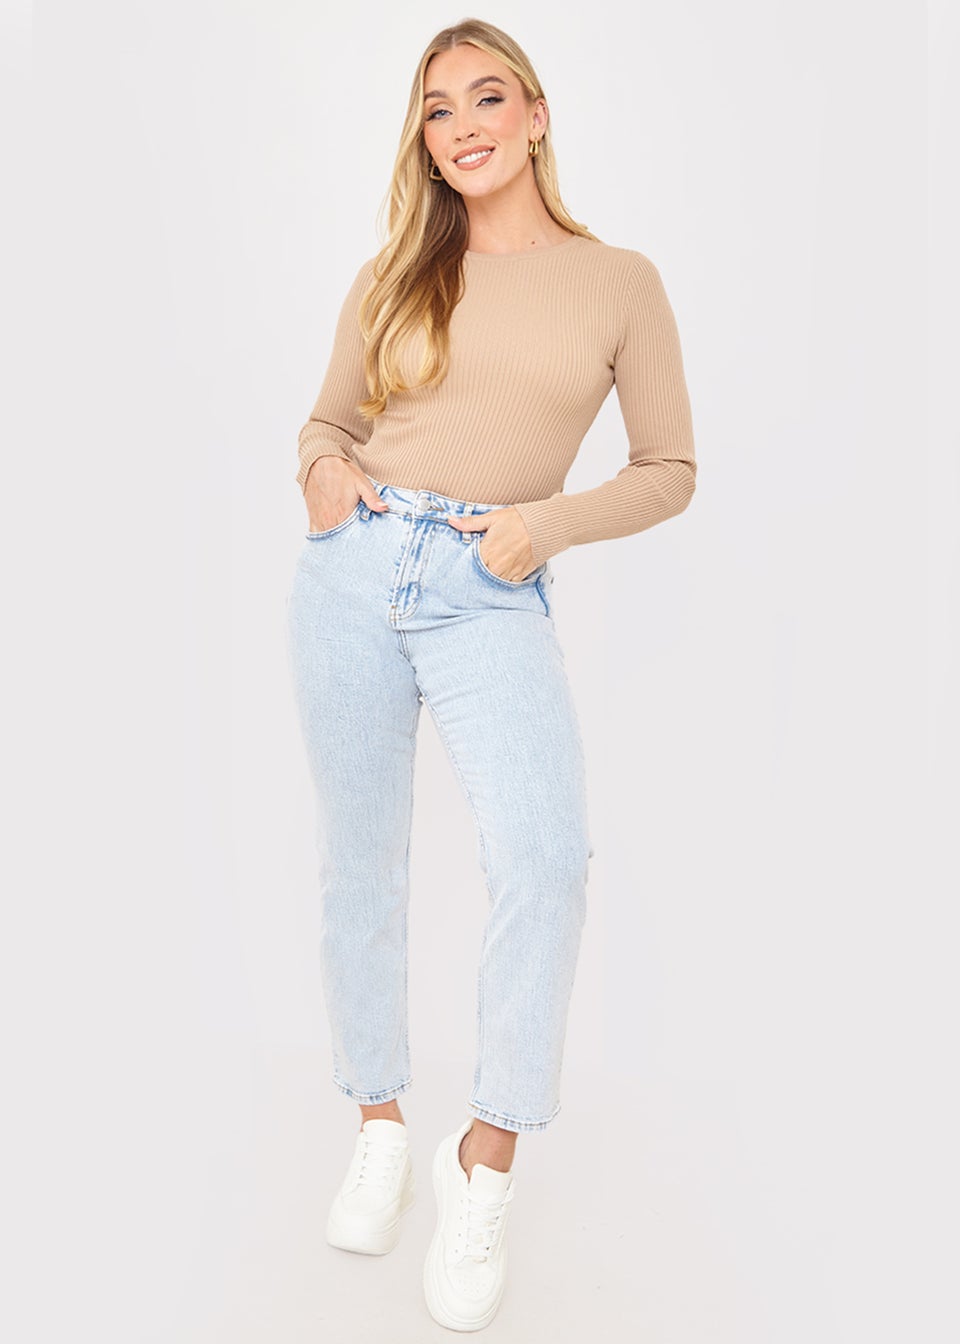 In the Style Jac Jossa Camel Ribbed Crew Neck Bodysuit